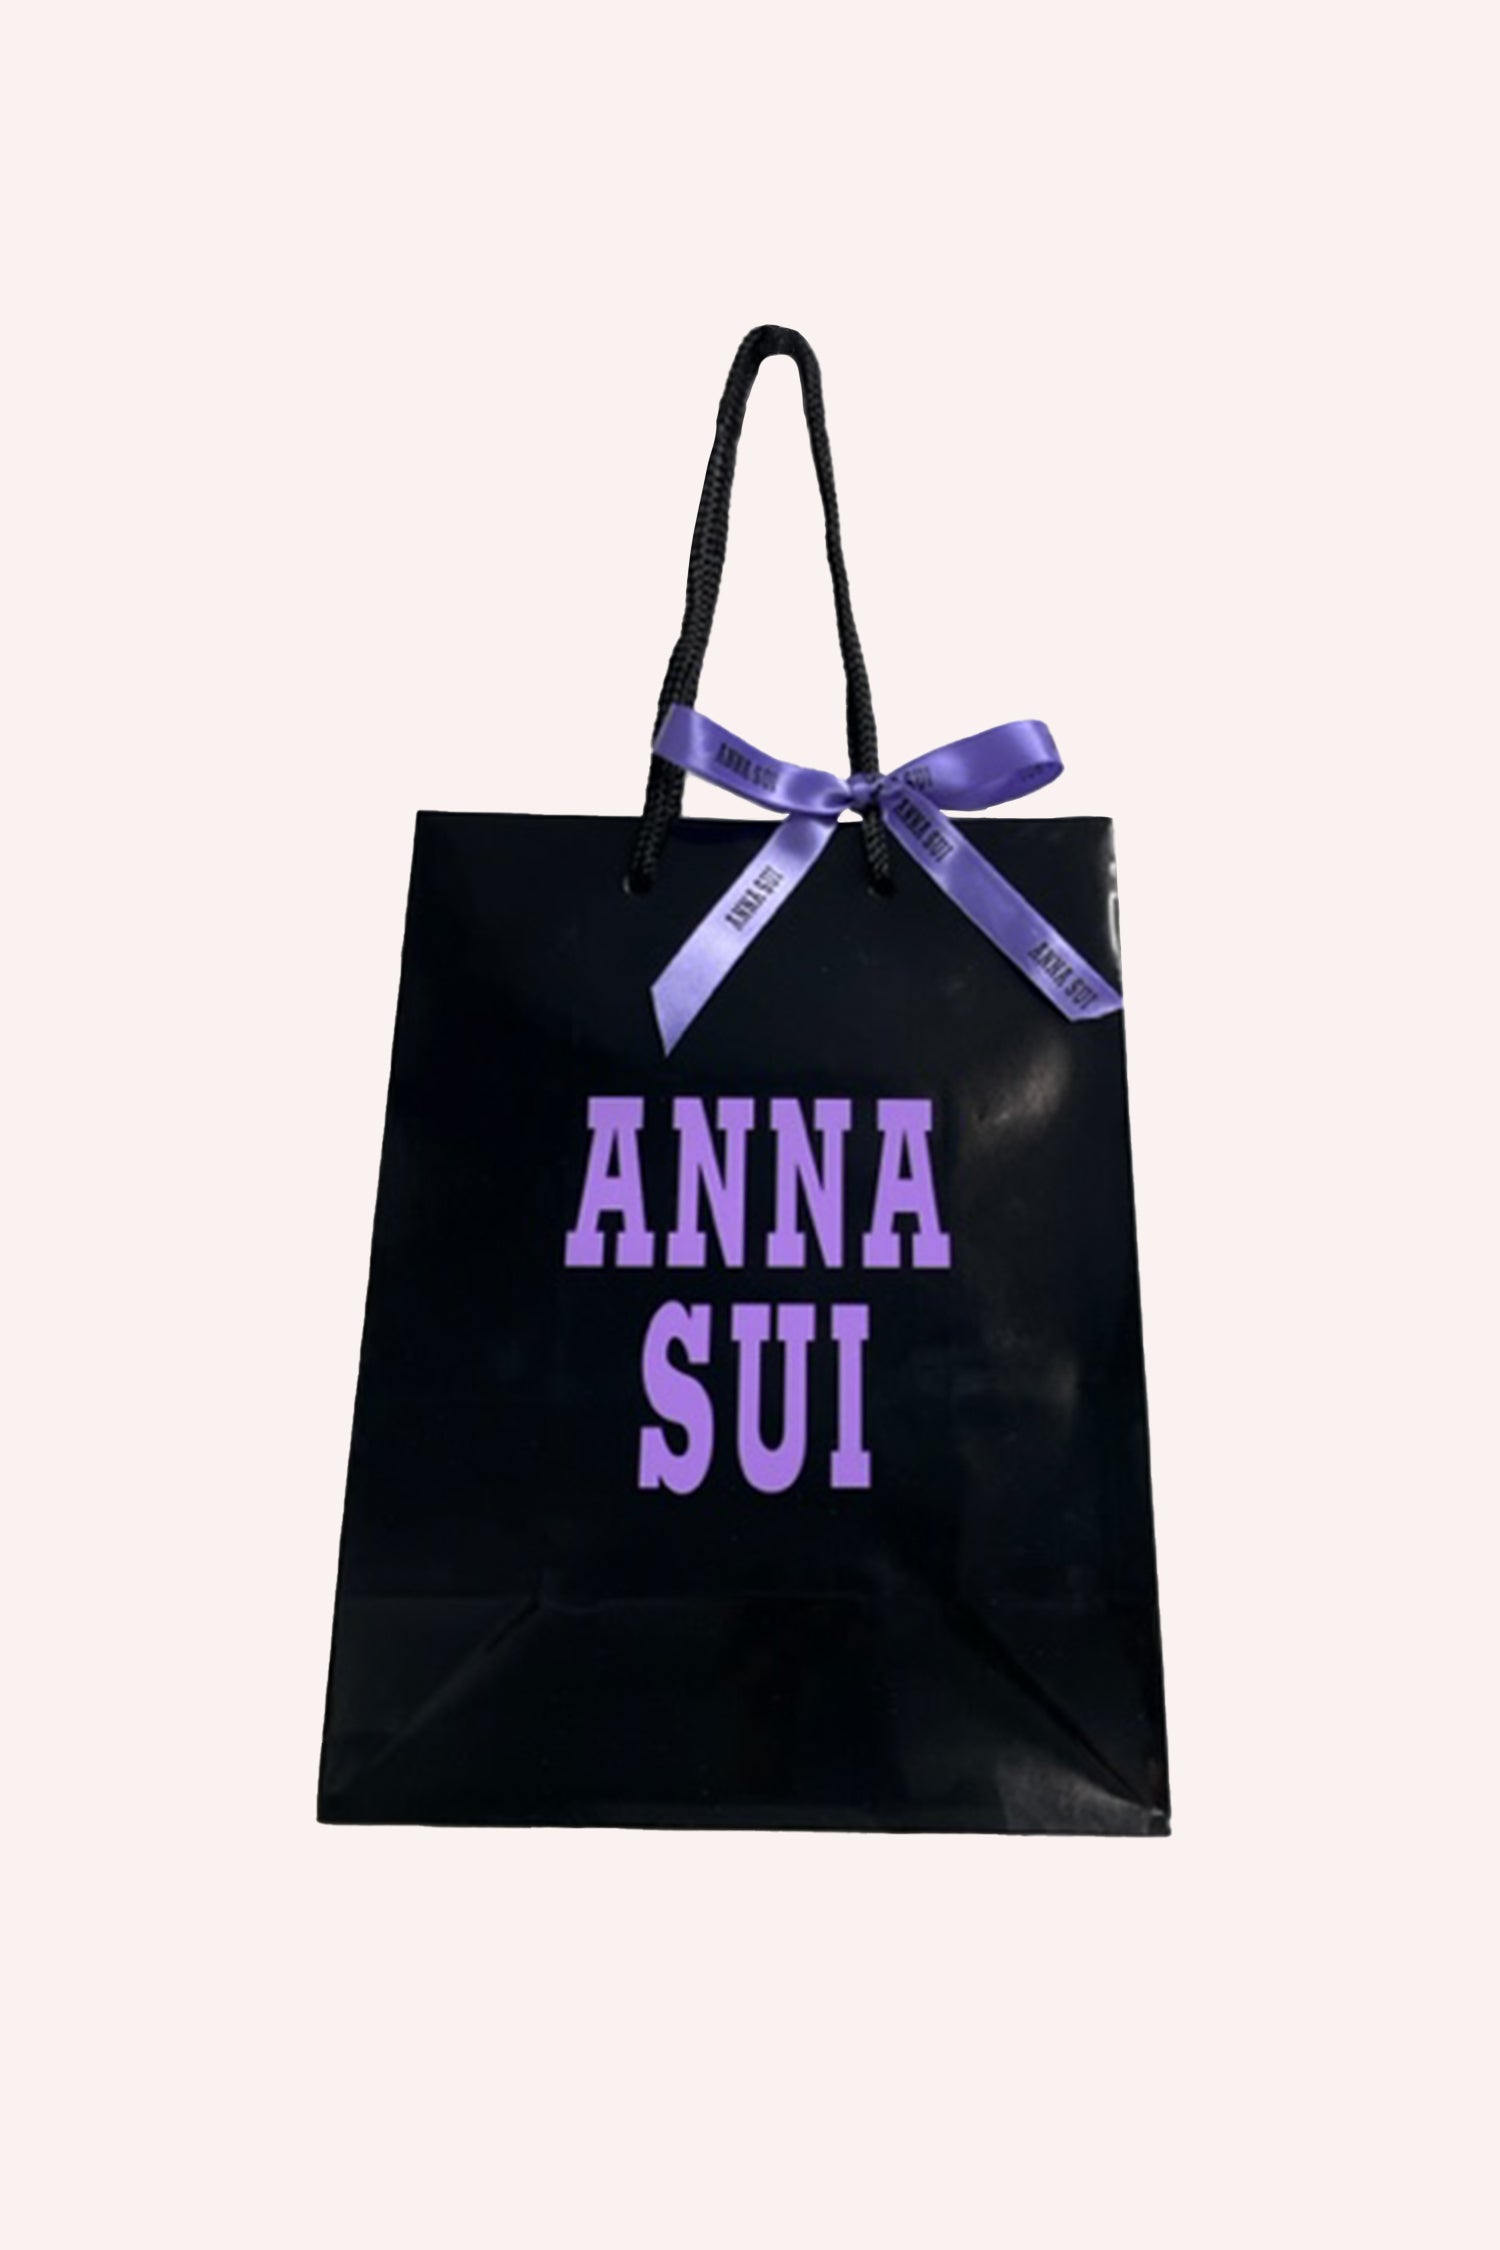 Rosy Dot Sock Bundle, 3-pair of Socks are in a Anna Sui gift bag